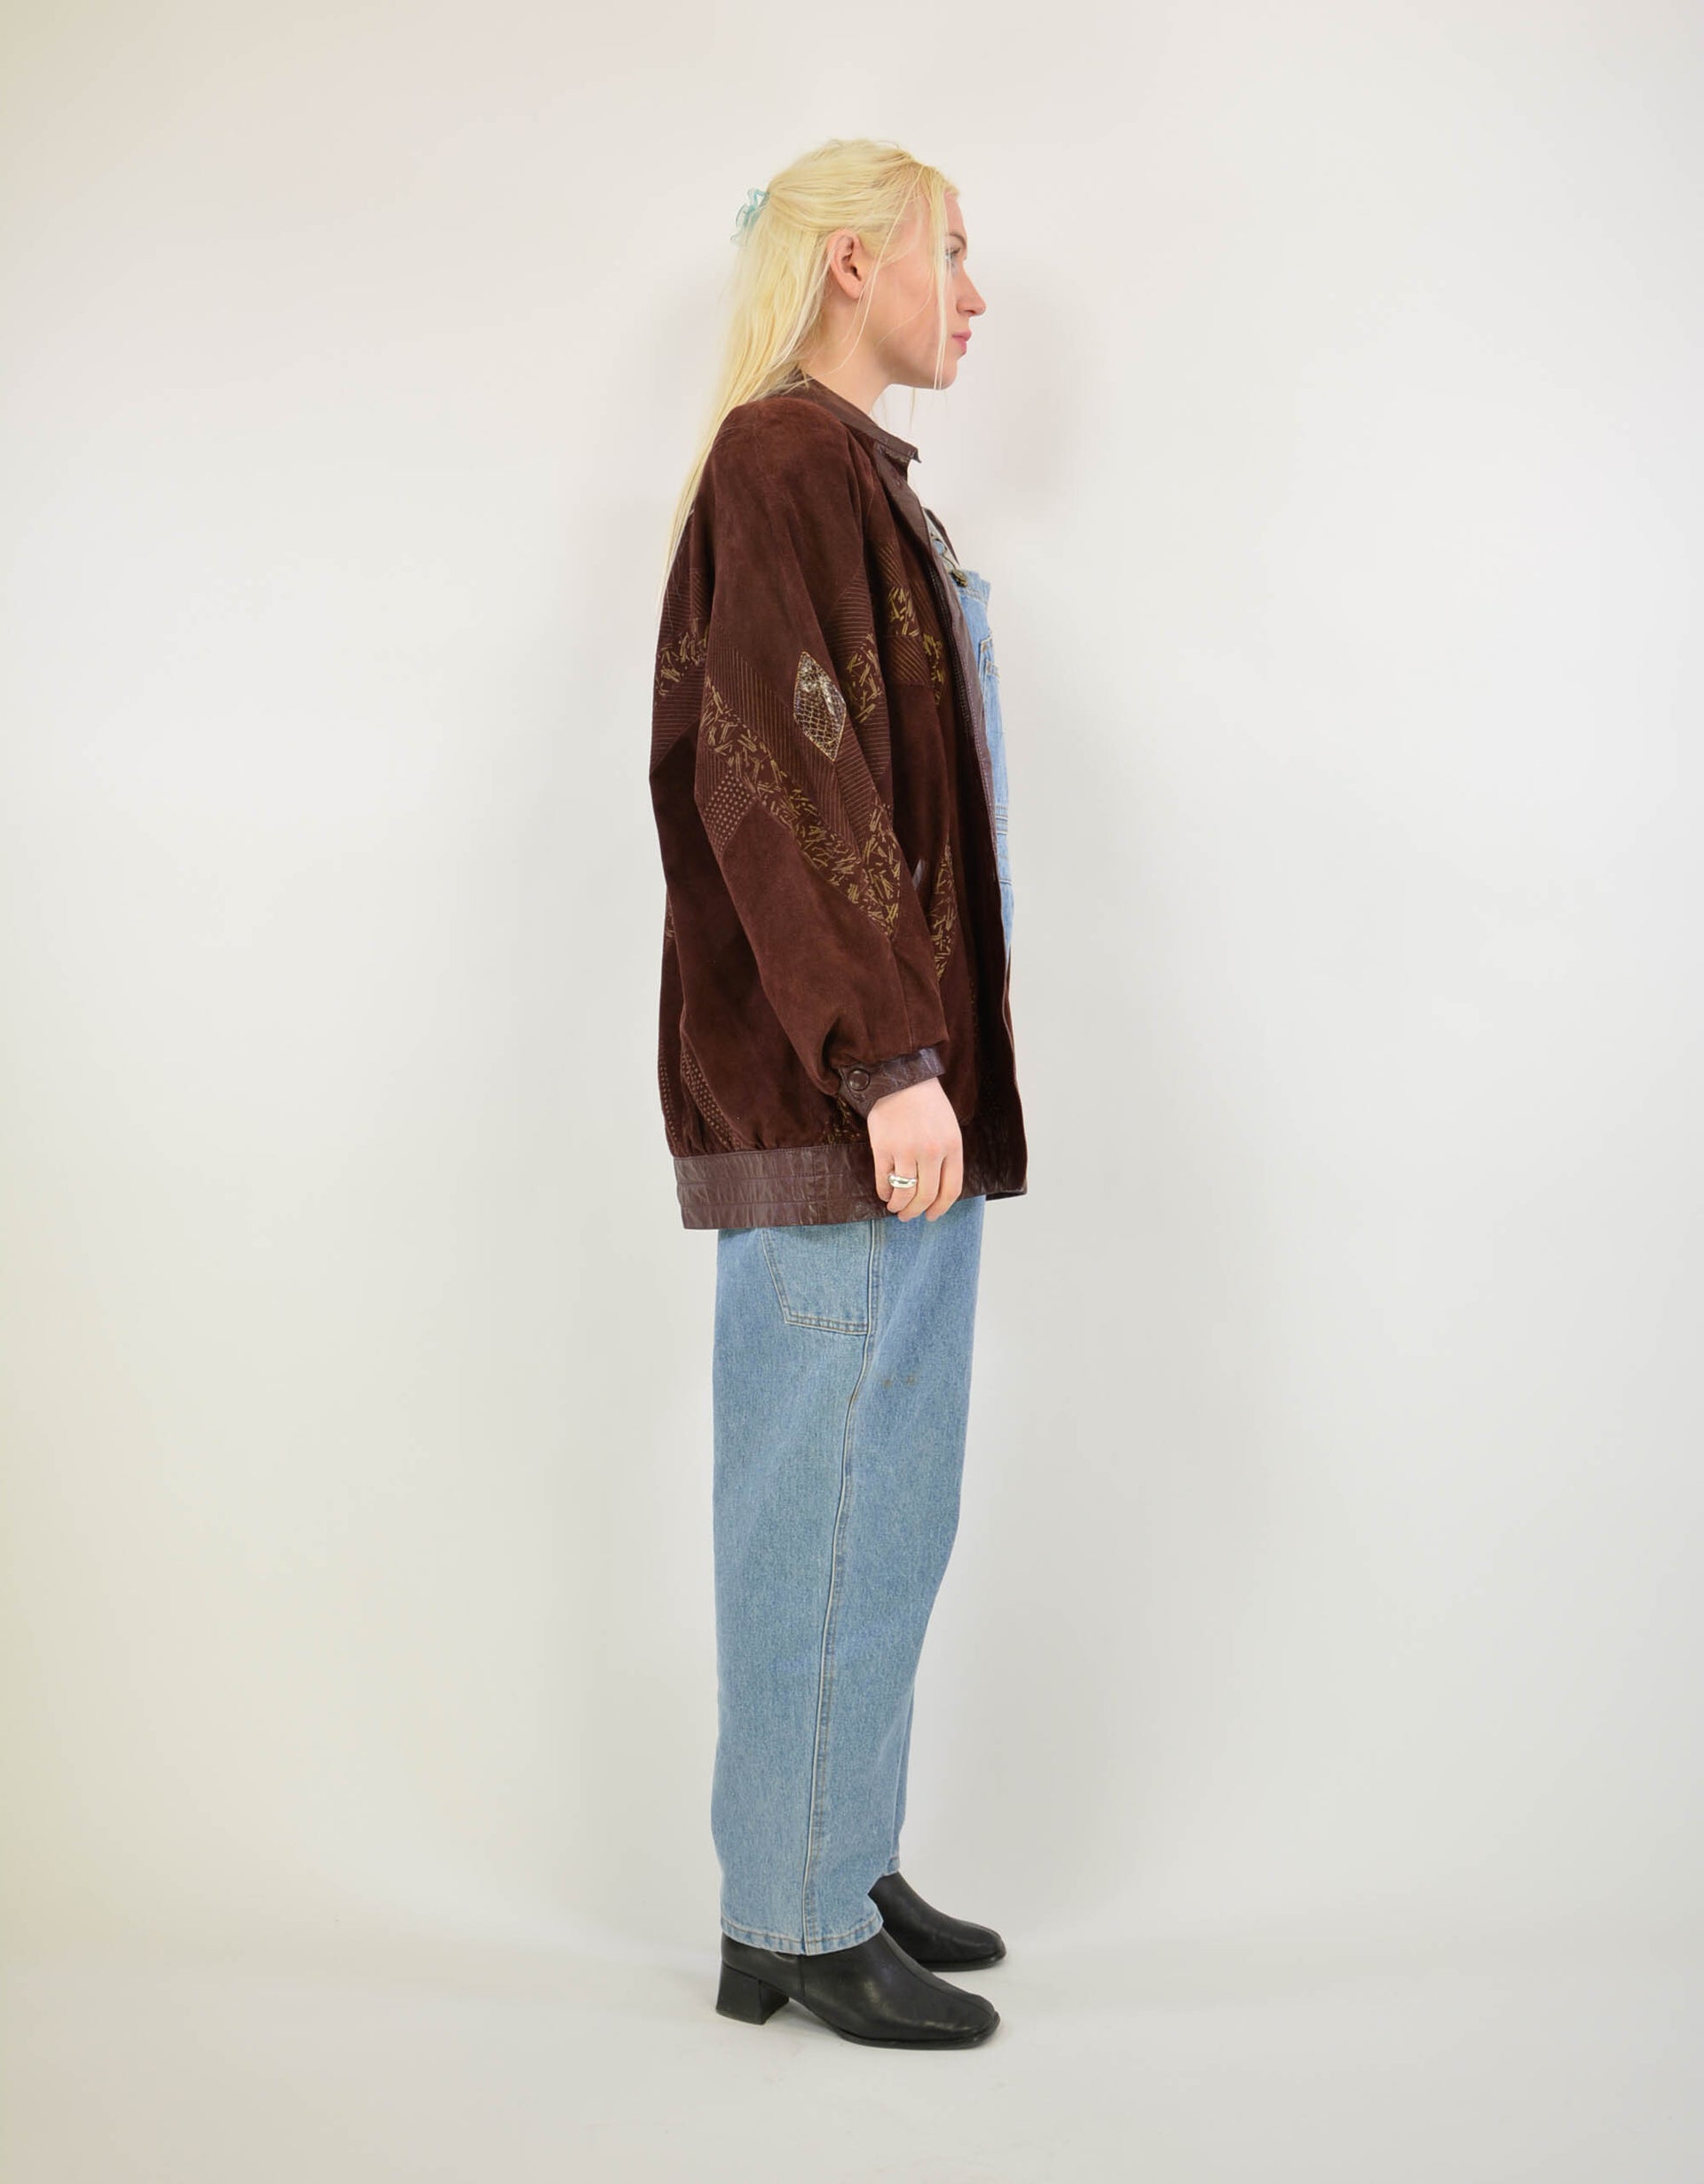 Suede leather jacket - PICKNWEIGHT - VINTAGE KILO STORE